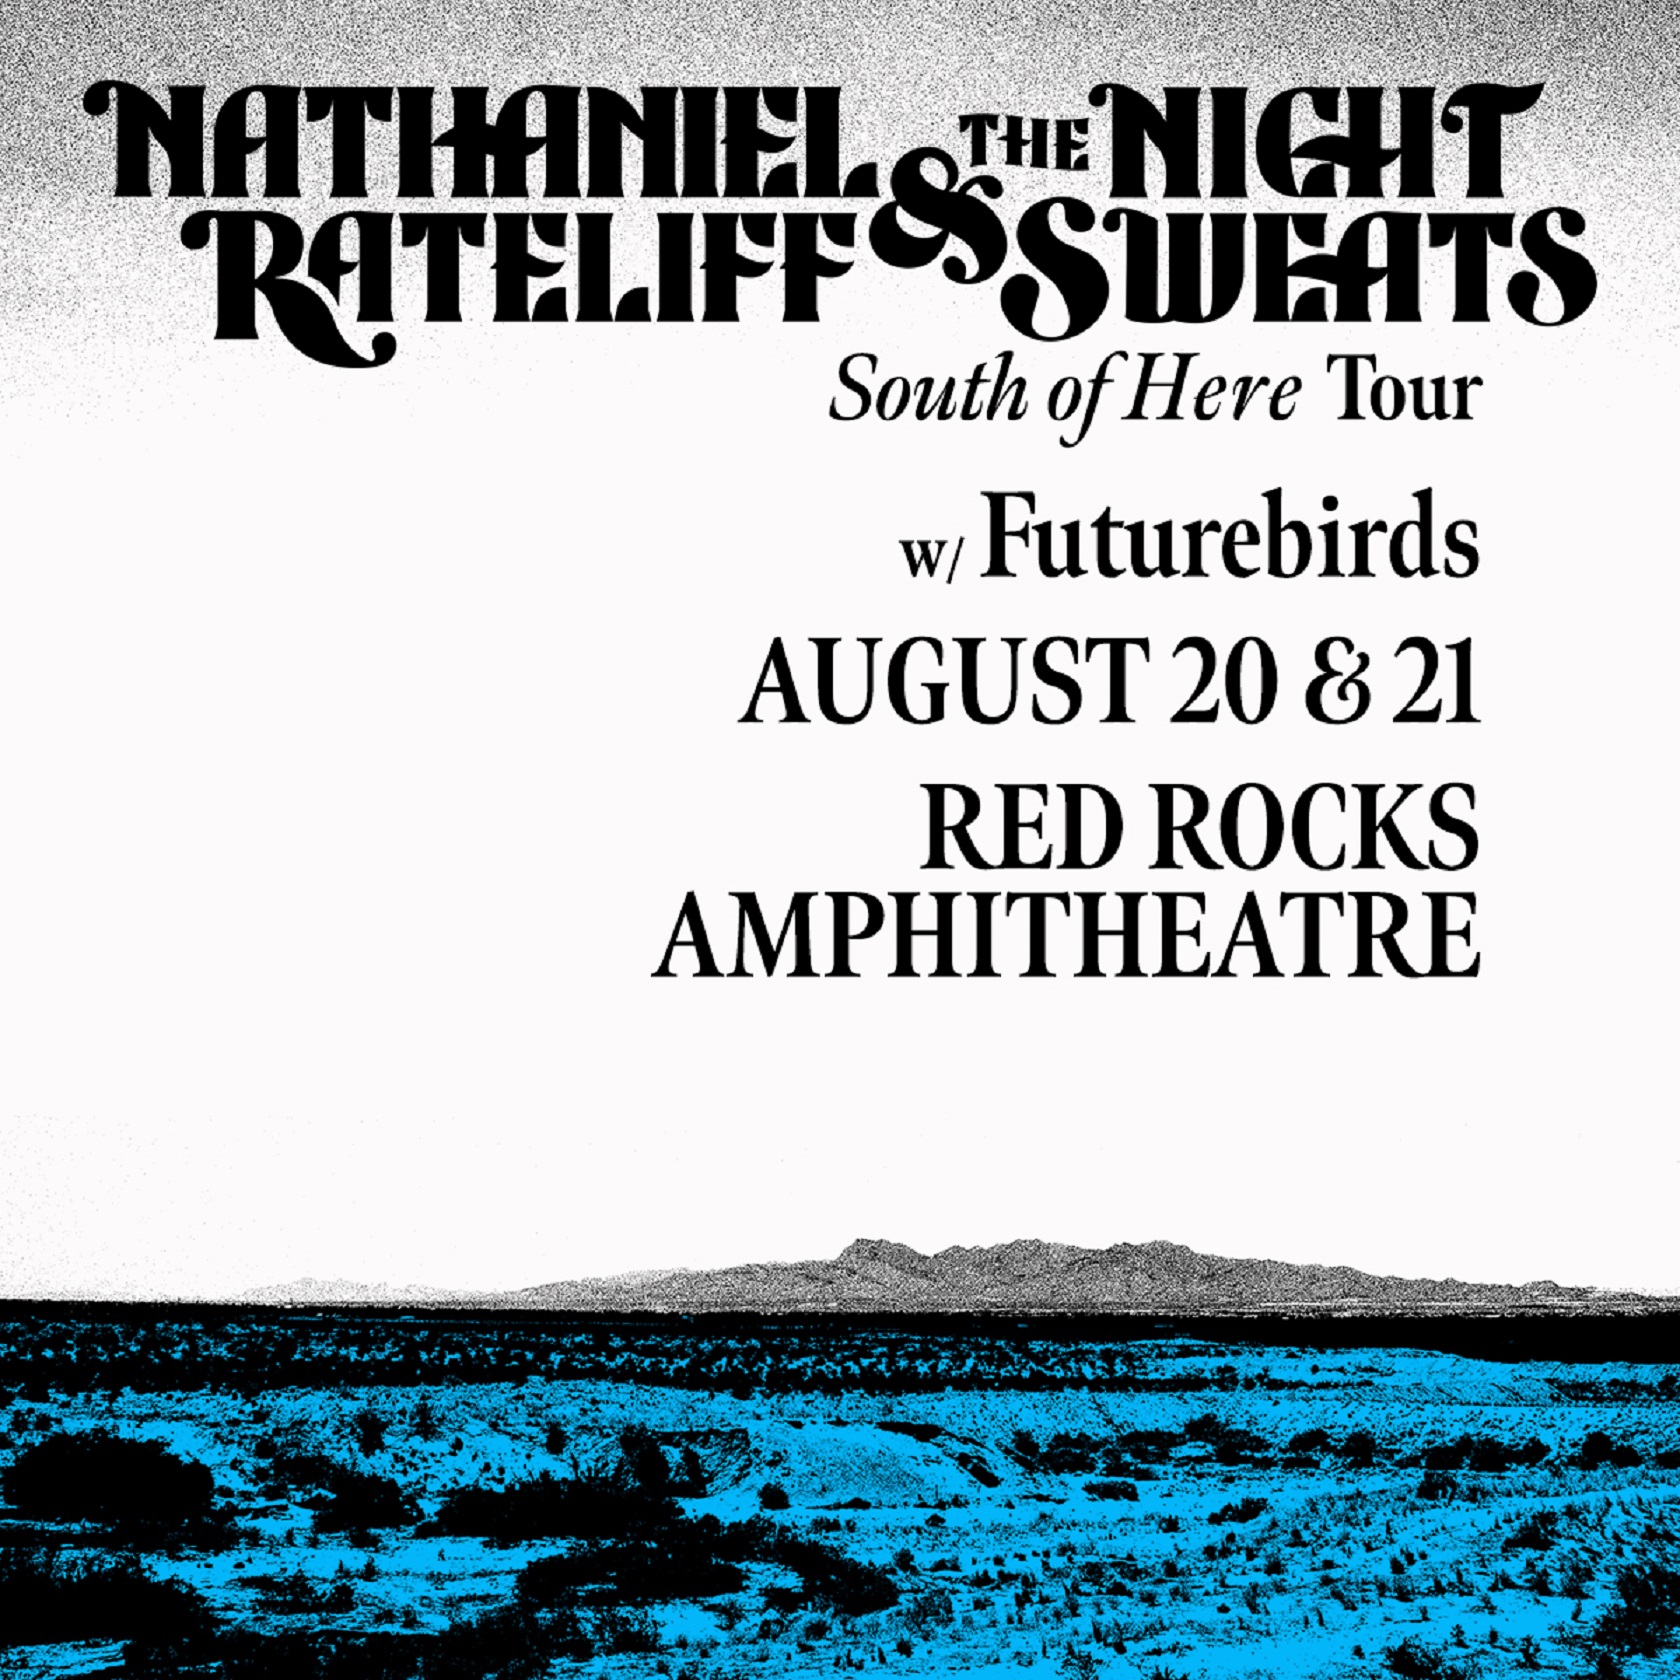 Nathaniel Rateliff & The Night Sweats Announce Two-Night Spectacle at Red Rocks Amphitheatre